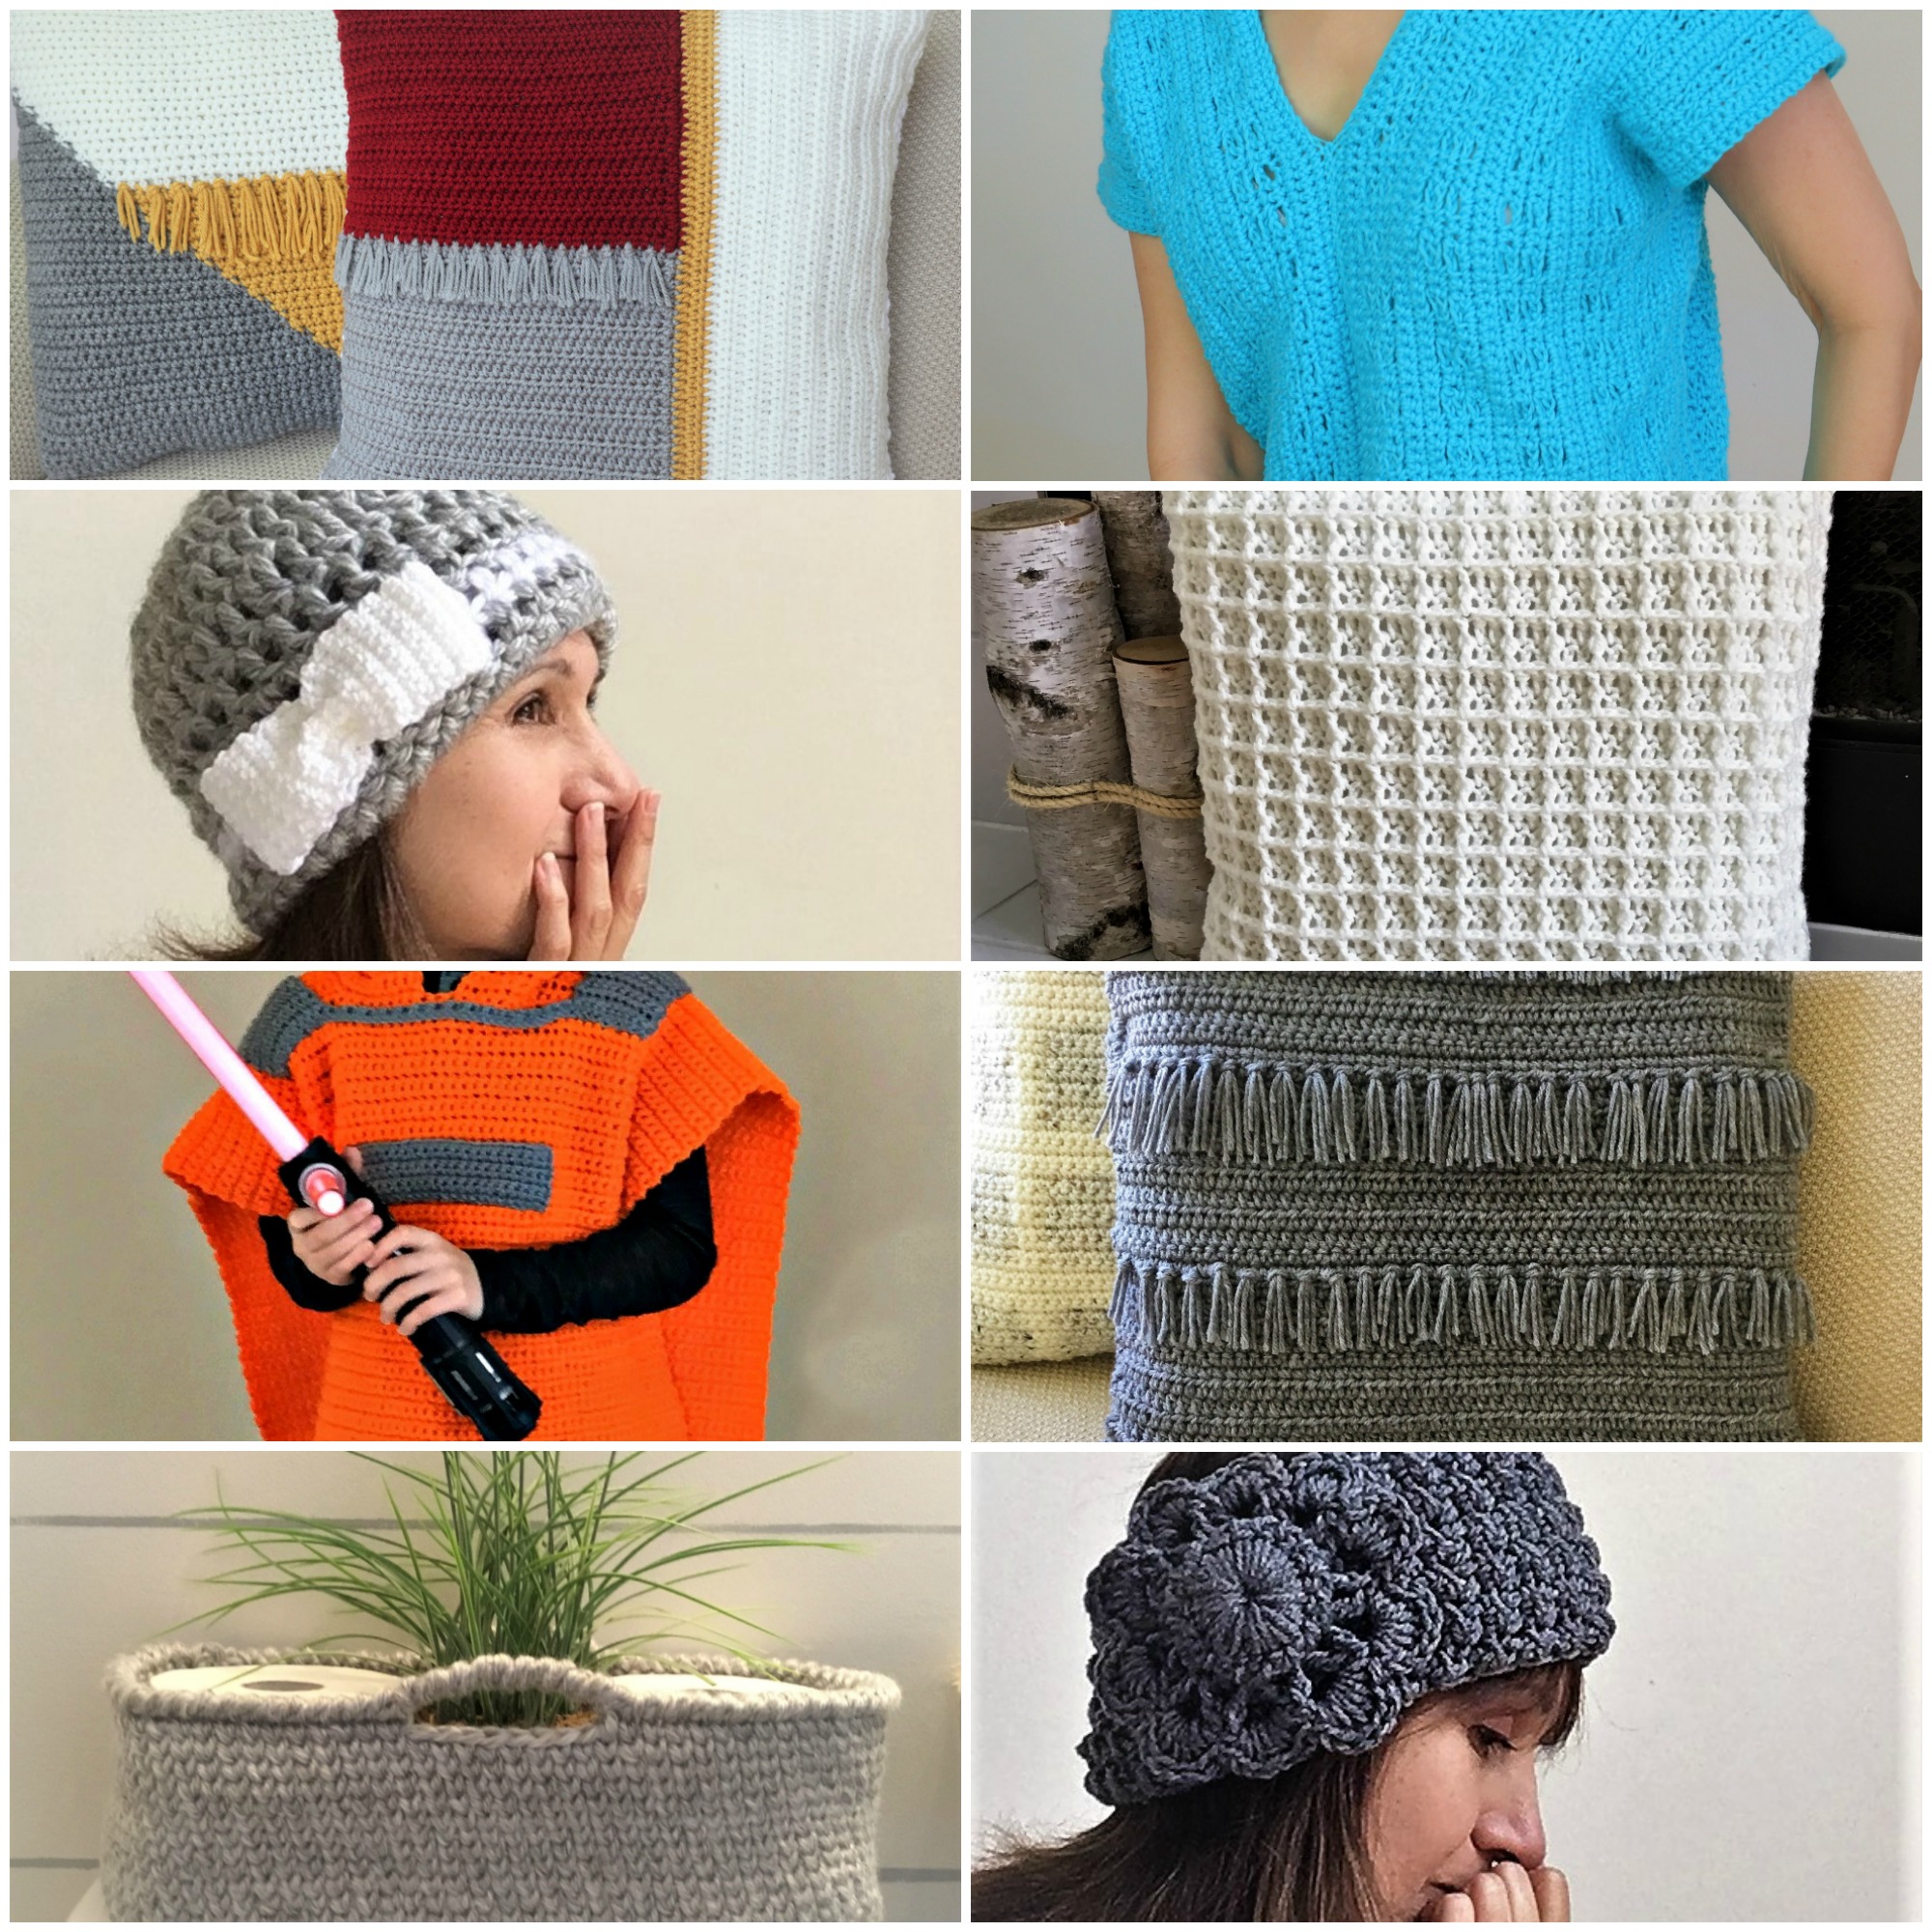 G's Crafts n' Things: Crochet pot handle cover